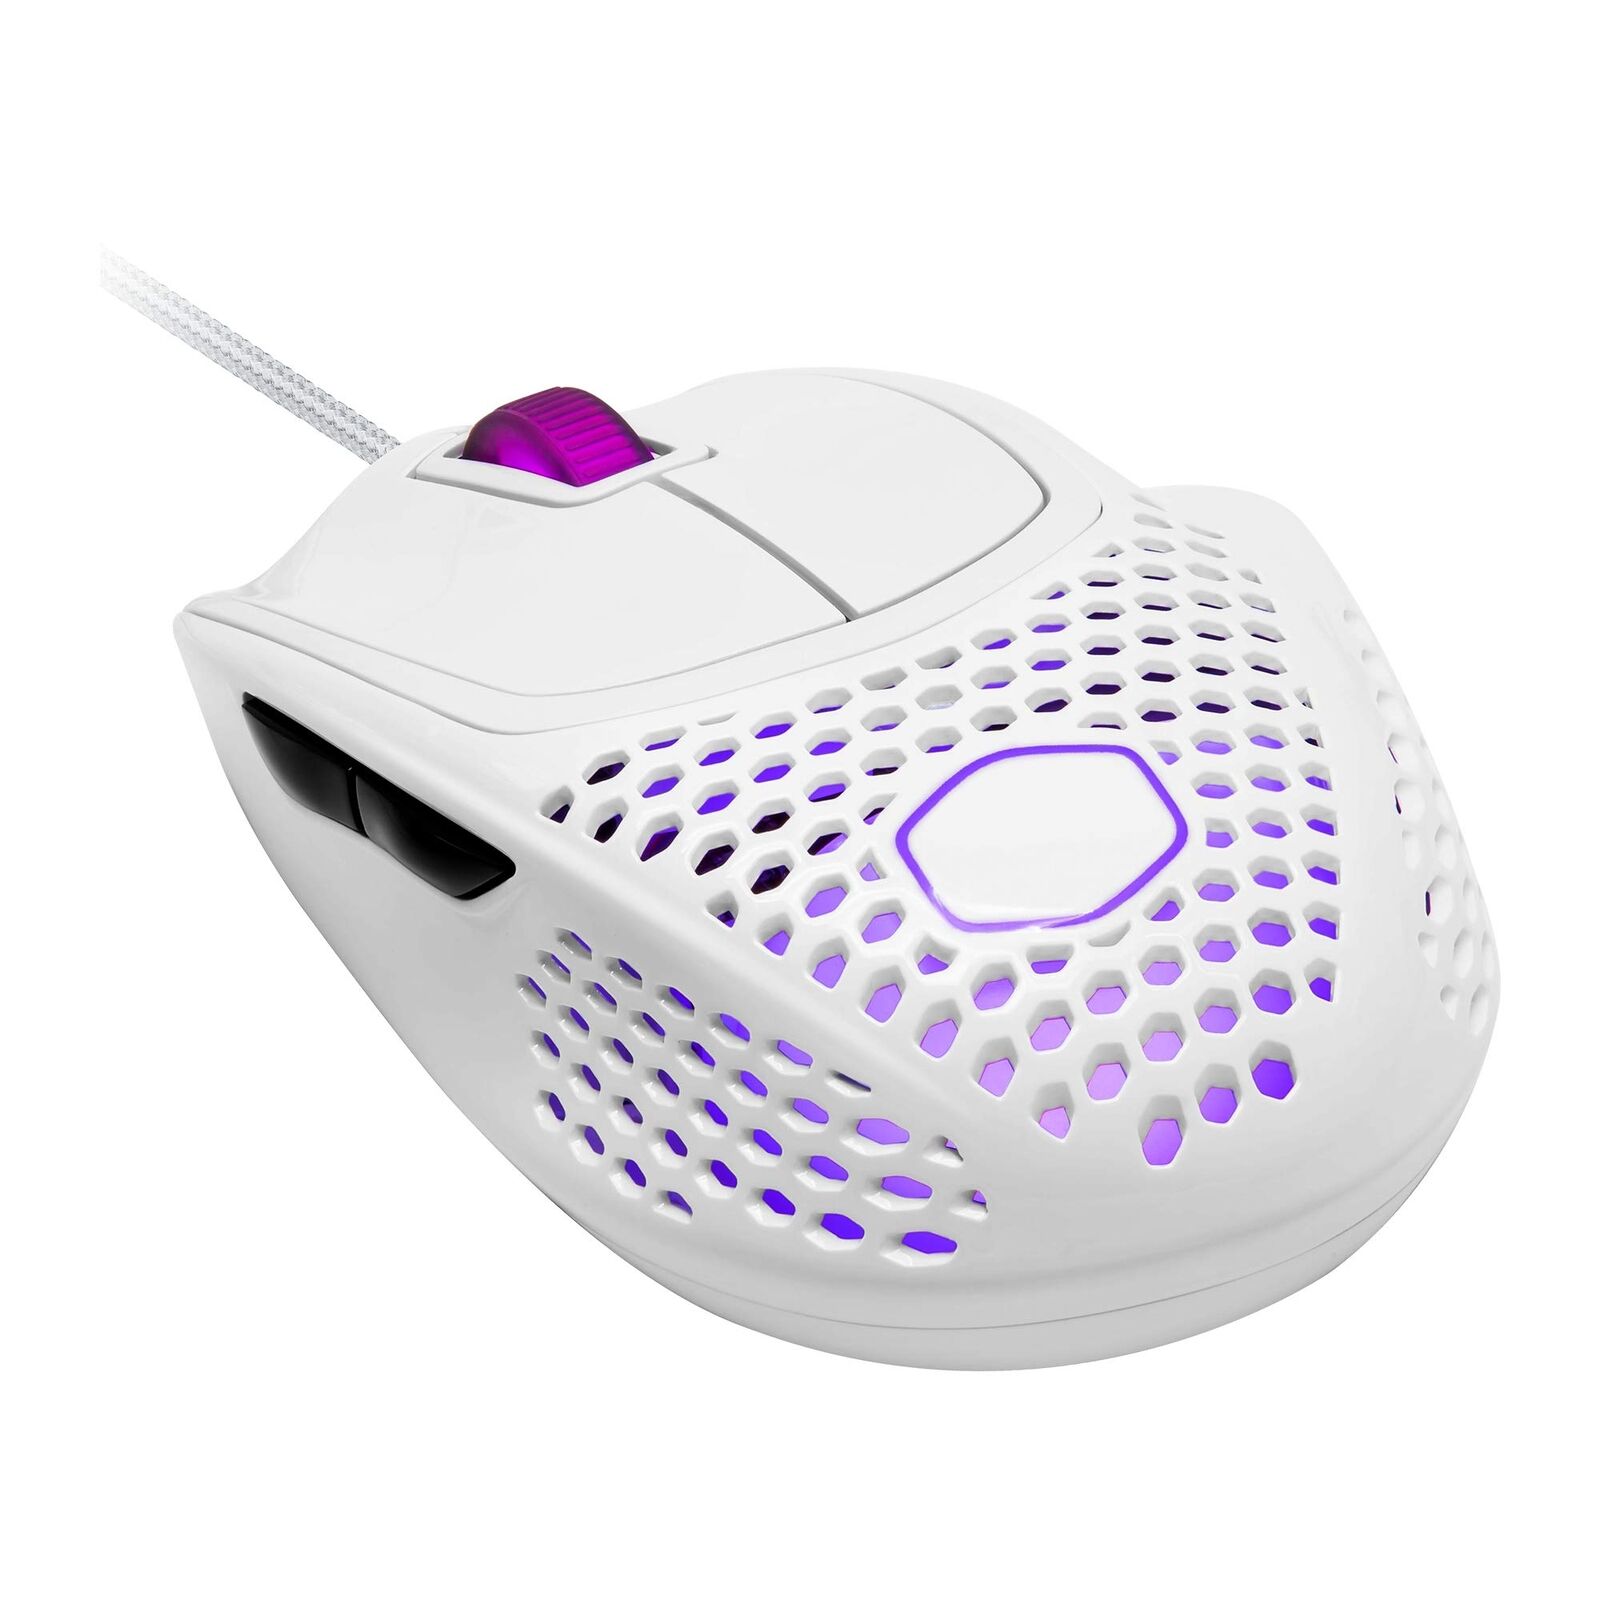 Cooler Master MM720 White Glossy Lightweight Gaming Mouse with Ultraweave Cable,